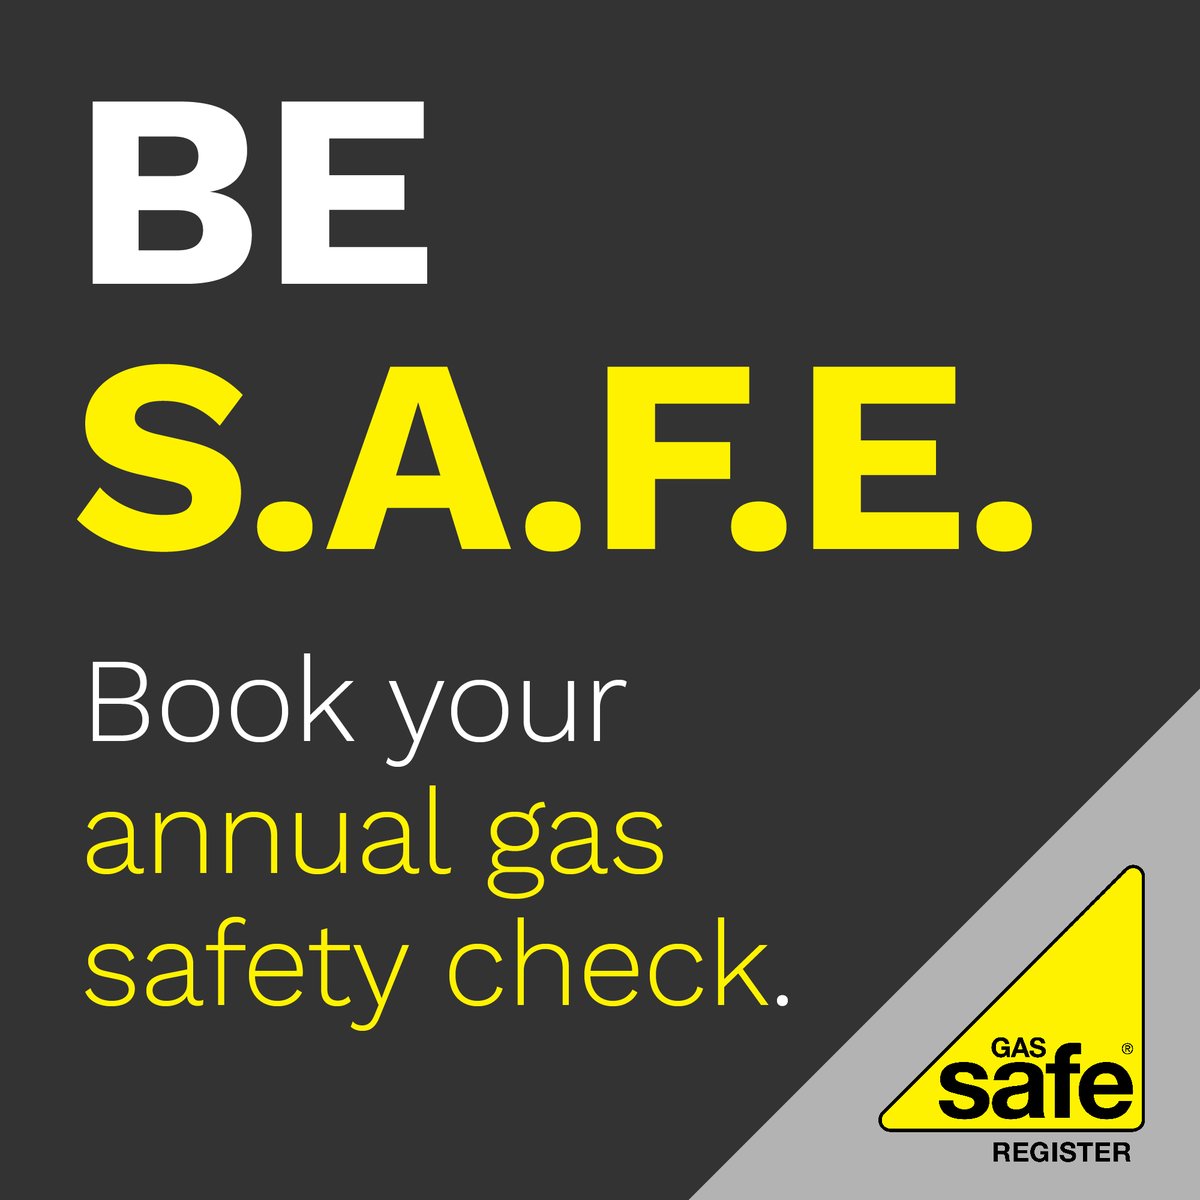 Did you know that you could invalidate your insurance if you don’t have an annual boiler check/service? 12.4 million people didn’t realise either! I’m joining @GasSafeRegister today to help you get started so you don’t pay a hefty price. Find out more here GasSafeRegister.co.uk